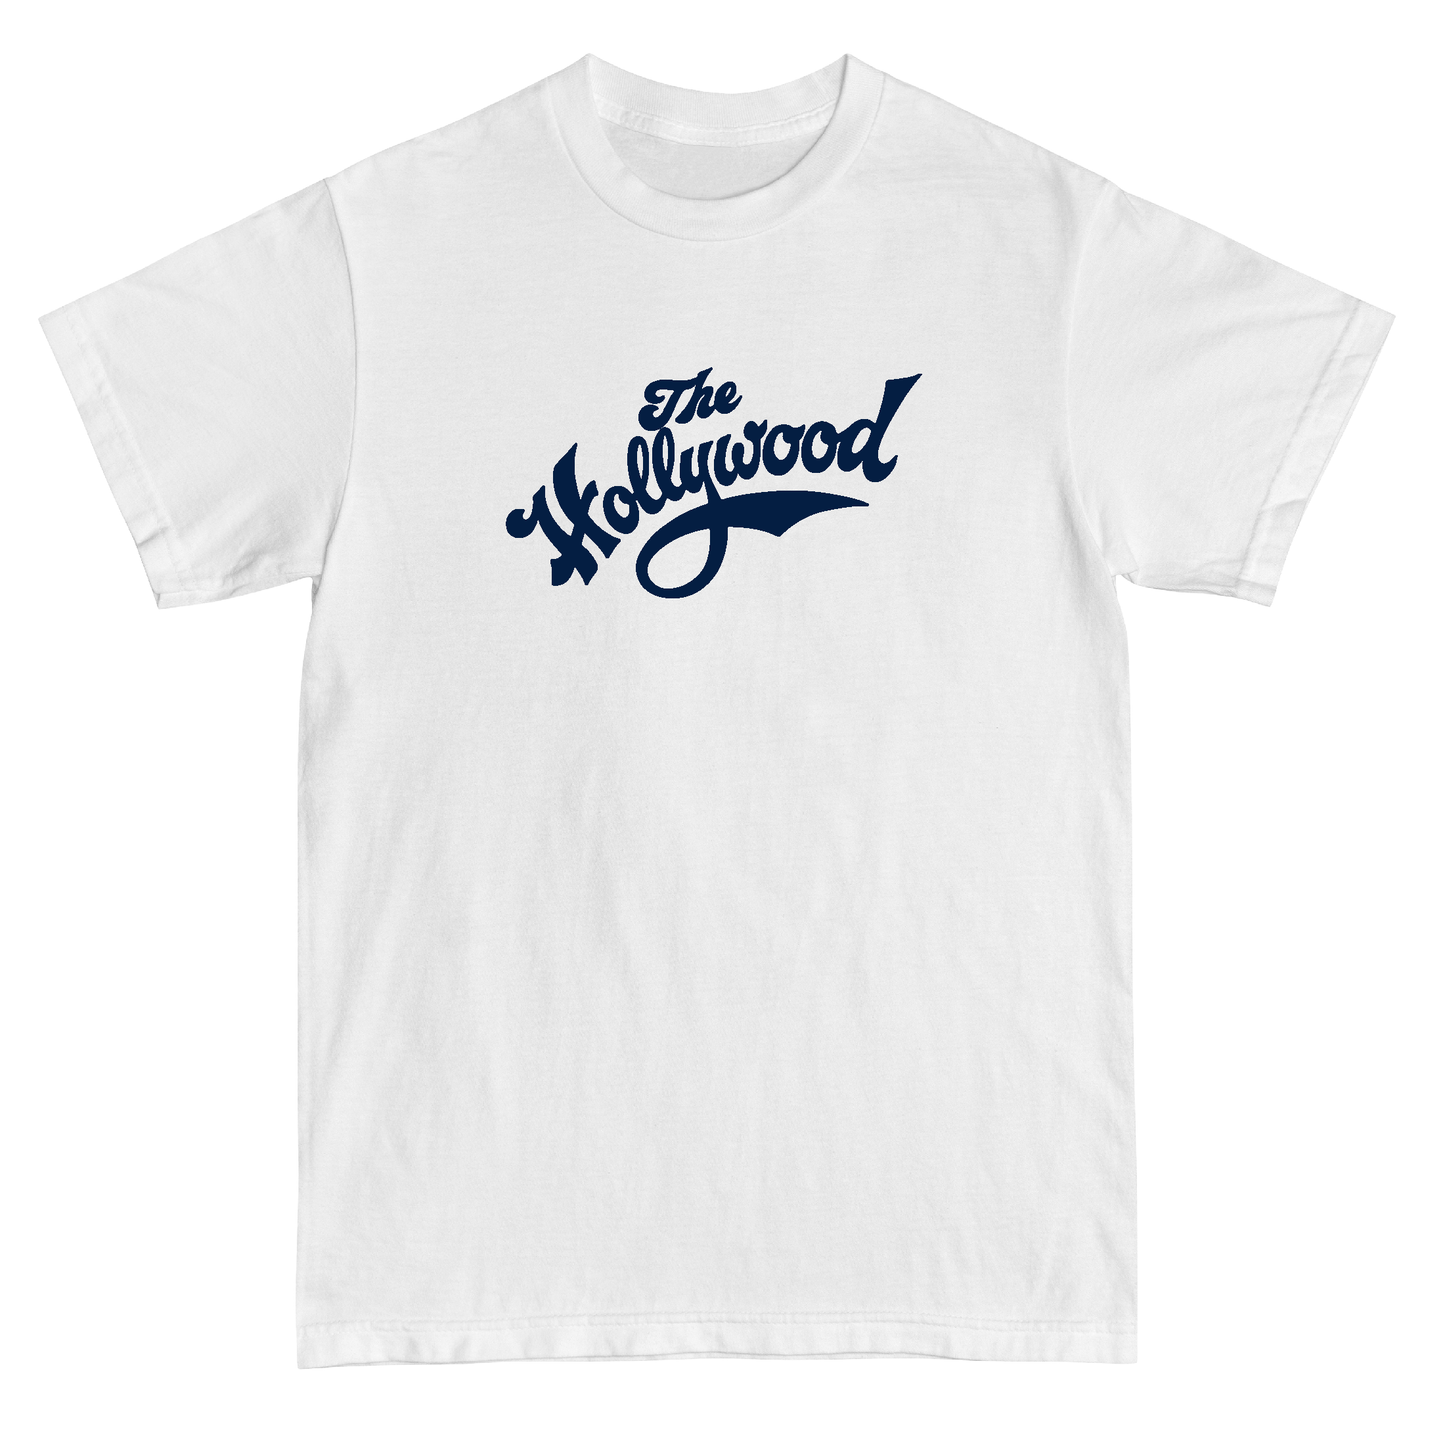 Classic Hollywood Tee - White